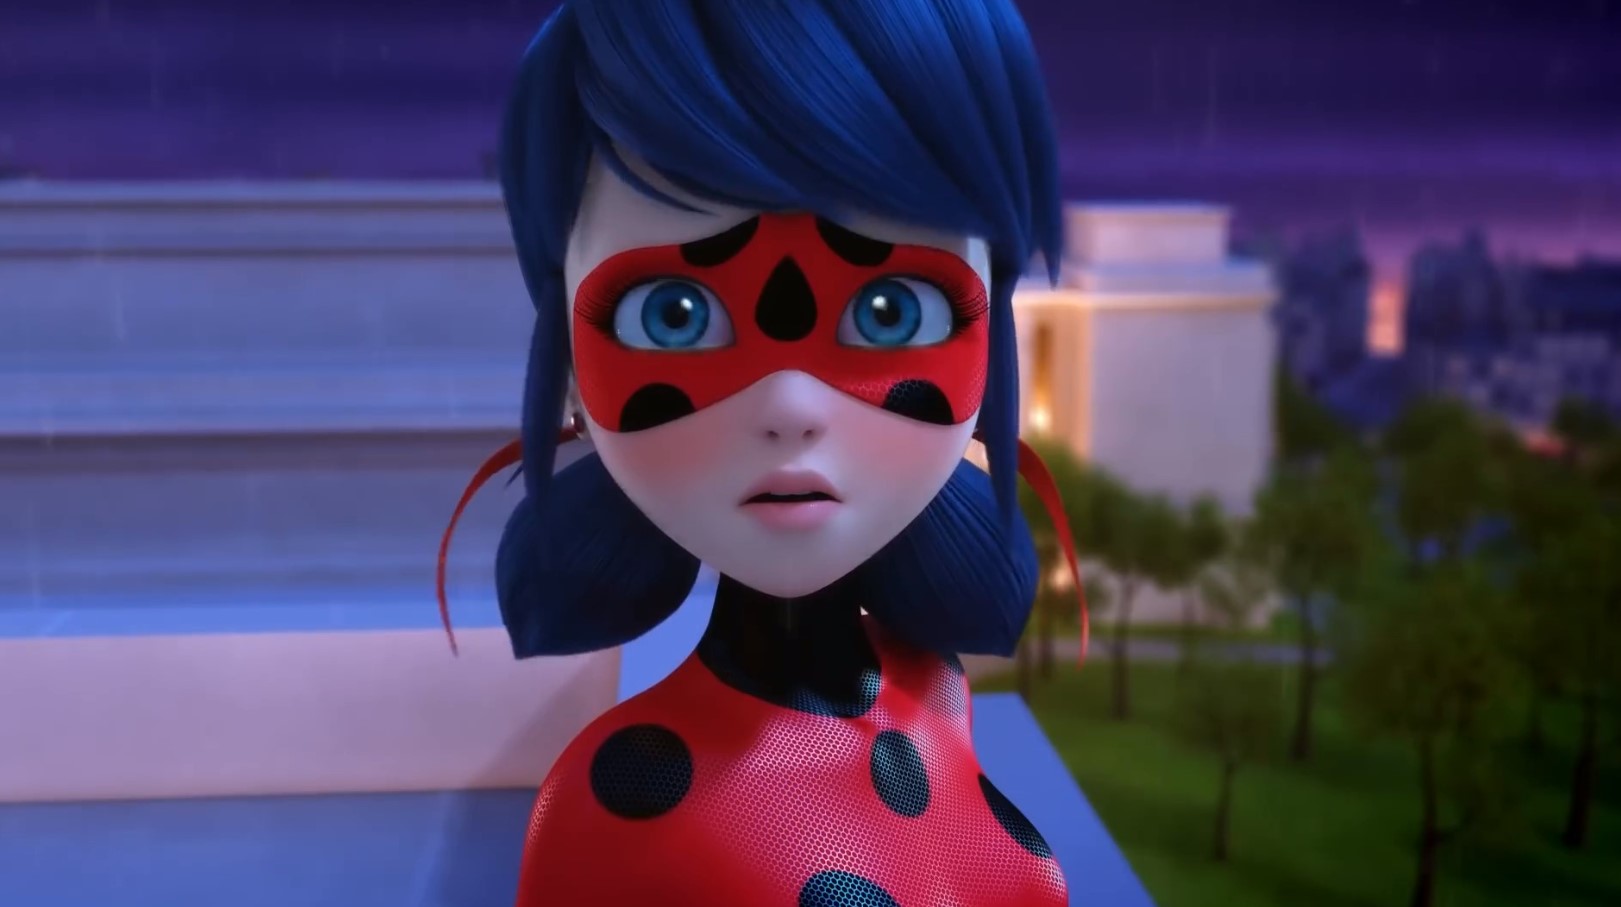 Miraculous Ladybug Season 5 Episode 5 Illusions: Release Date OUT